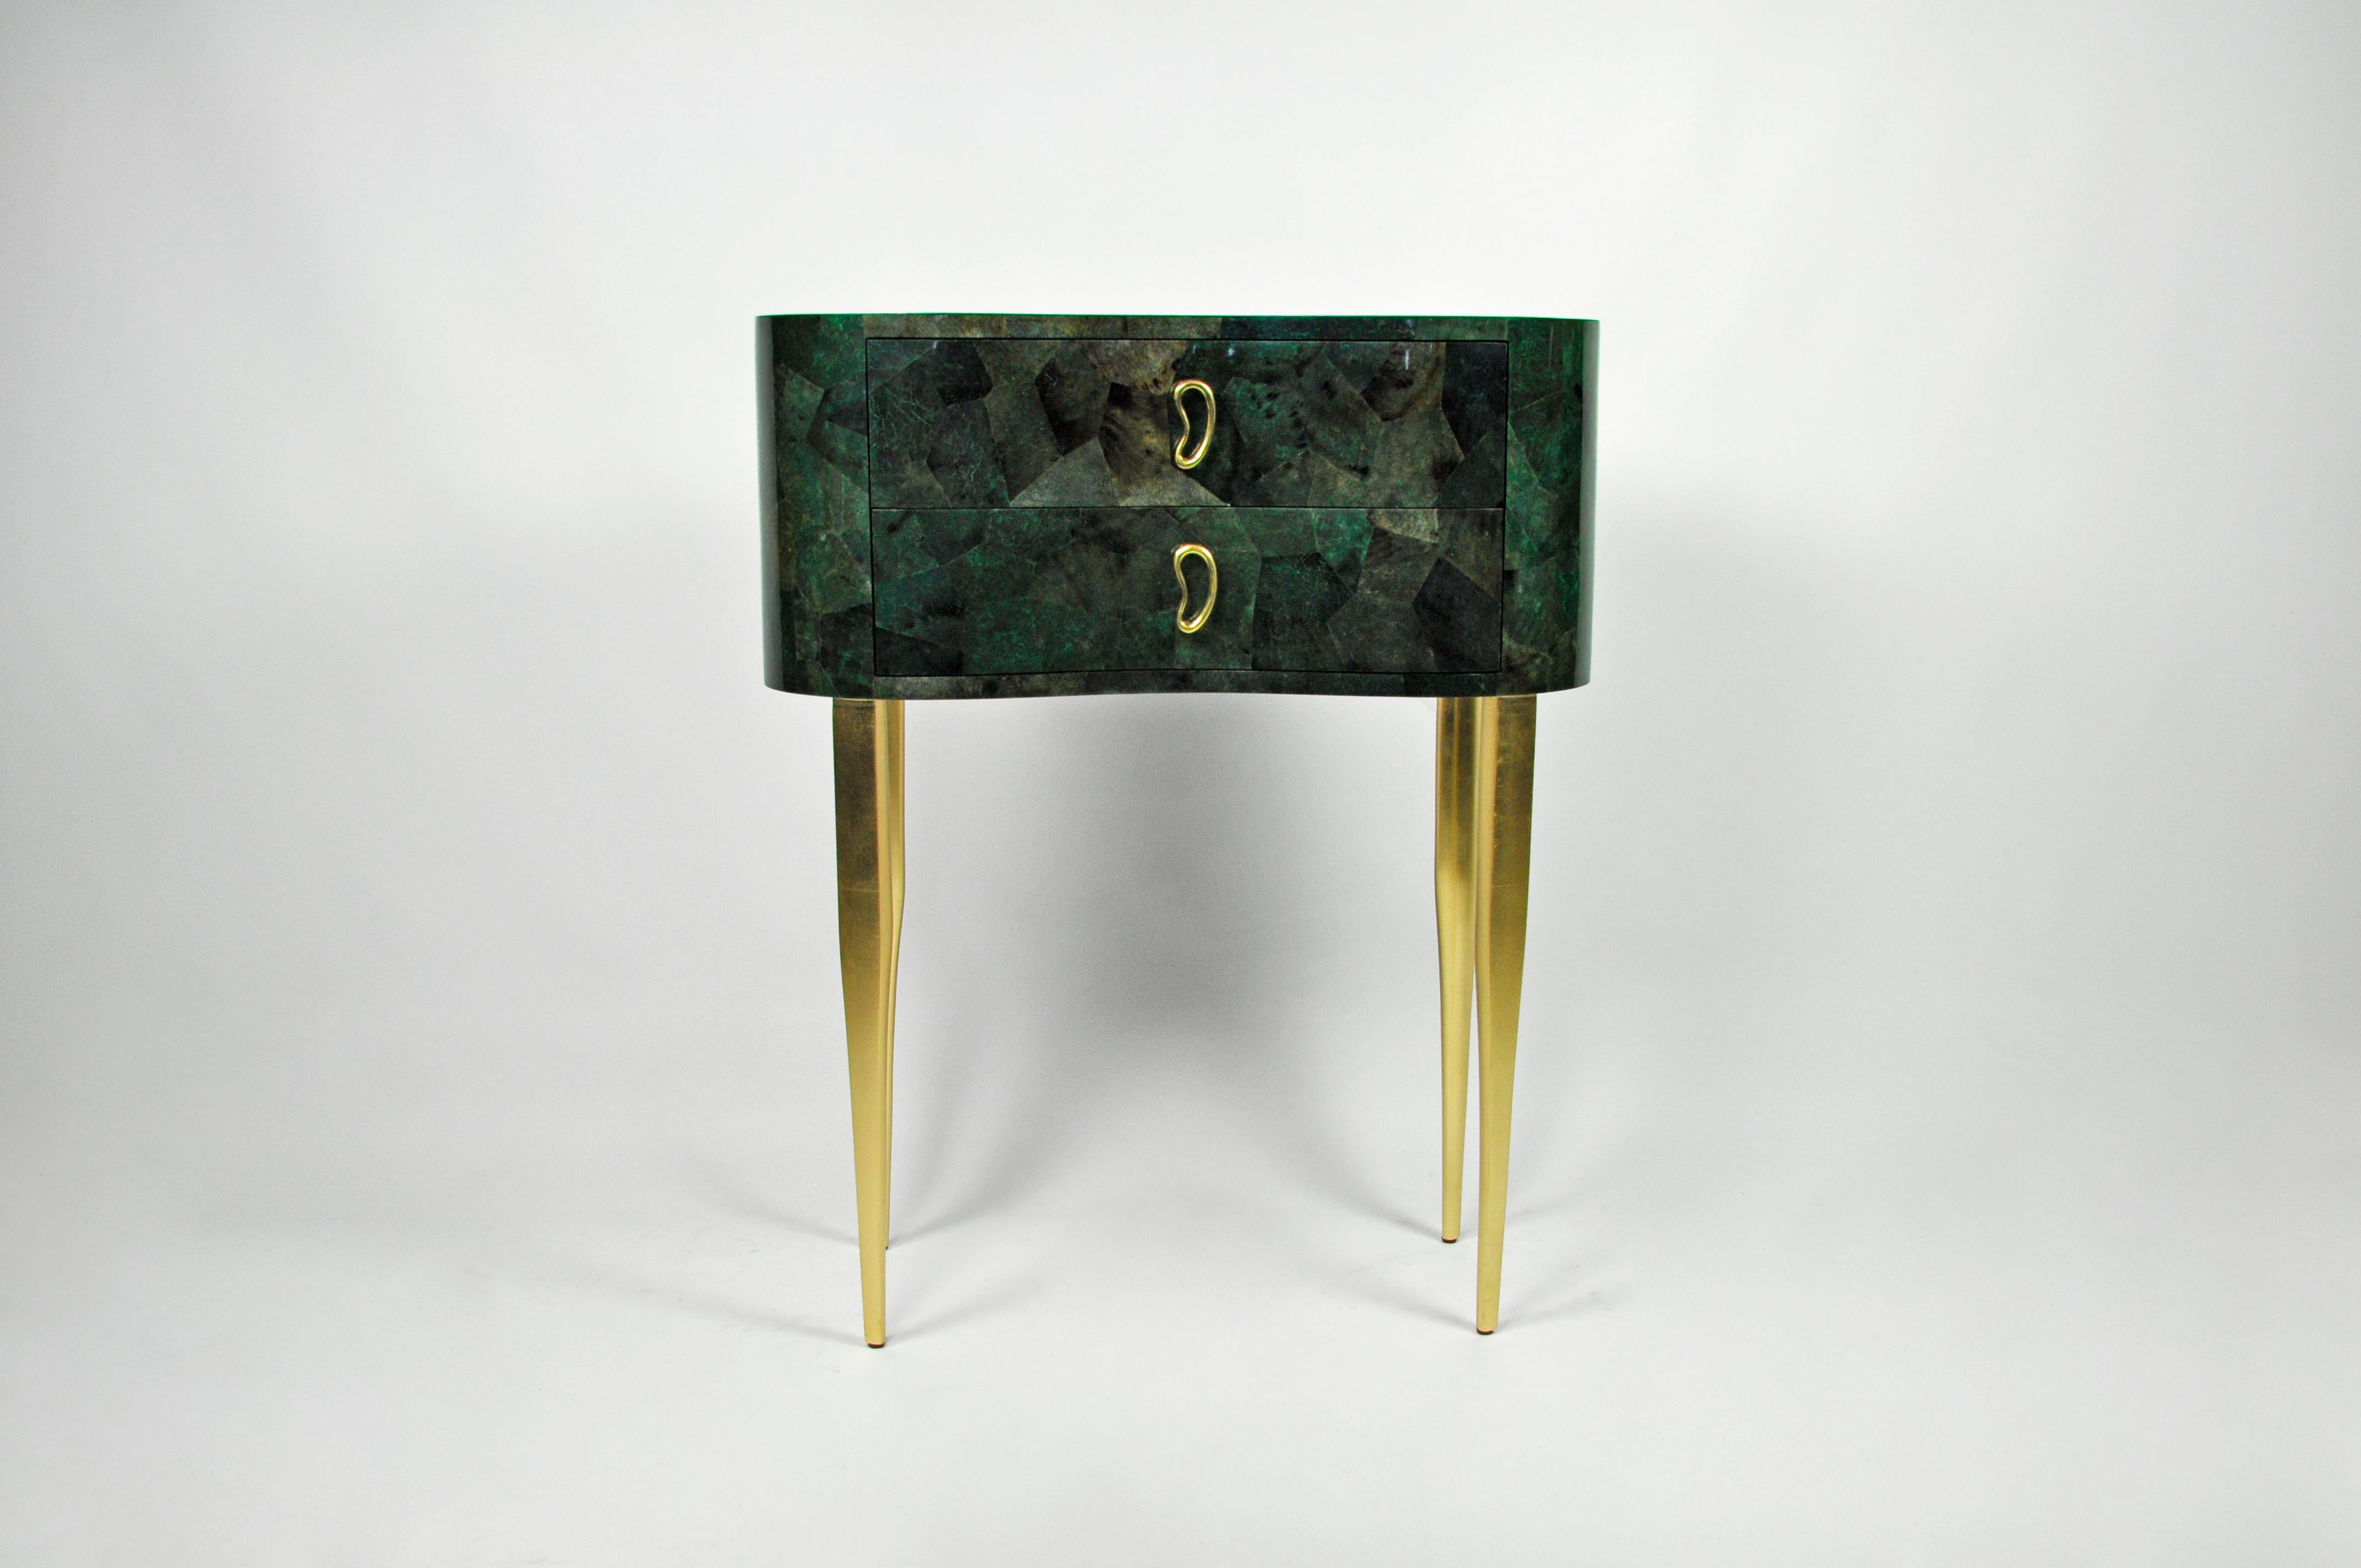 This console table is made of green polished shell marquetry .
It has 2 drawers with cast brass handles.
The legs are in gilded wood.
The bean organic shape gives a very glamorous and sophisticated aspect to this console table.

The dimensions of